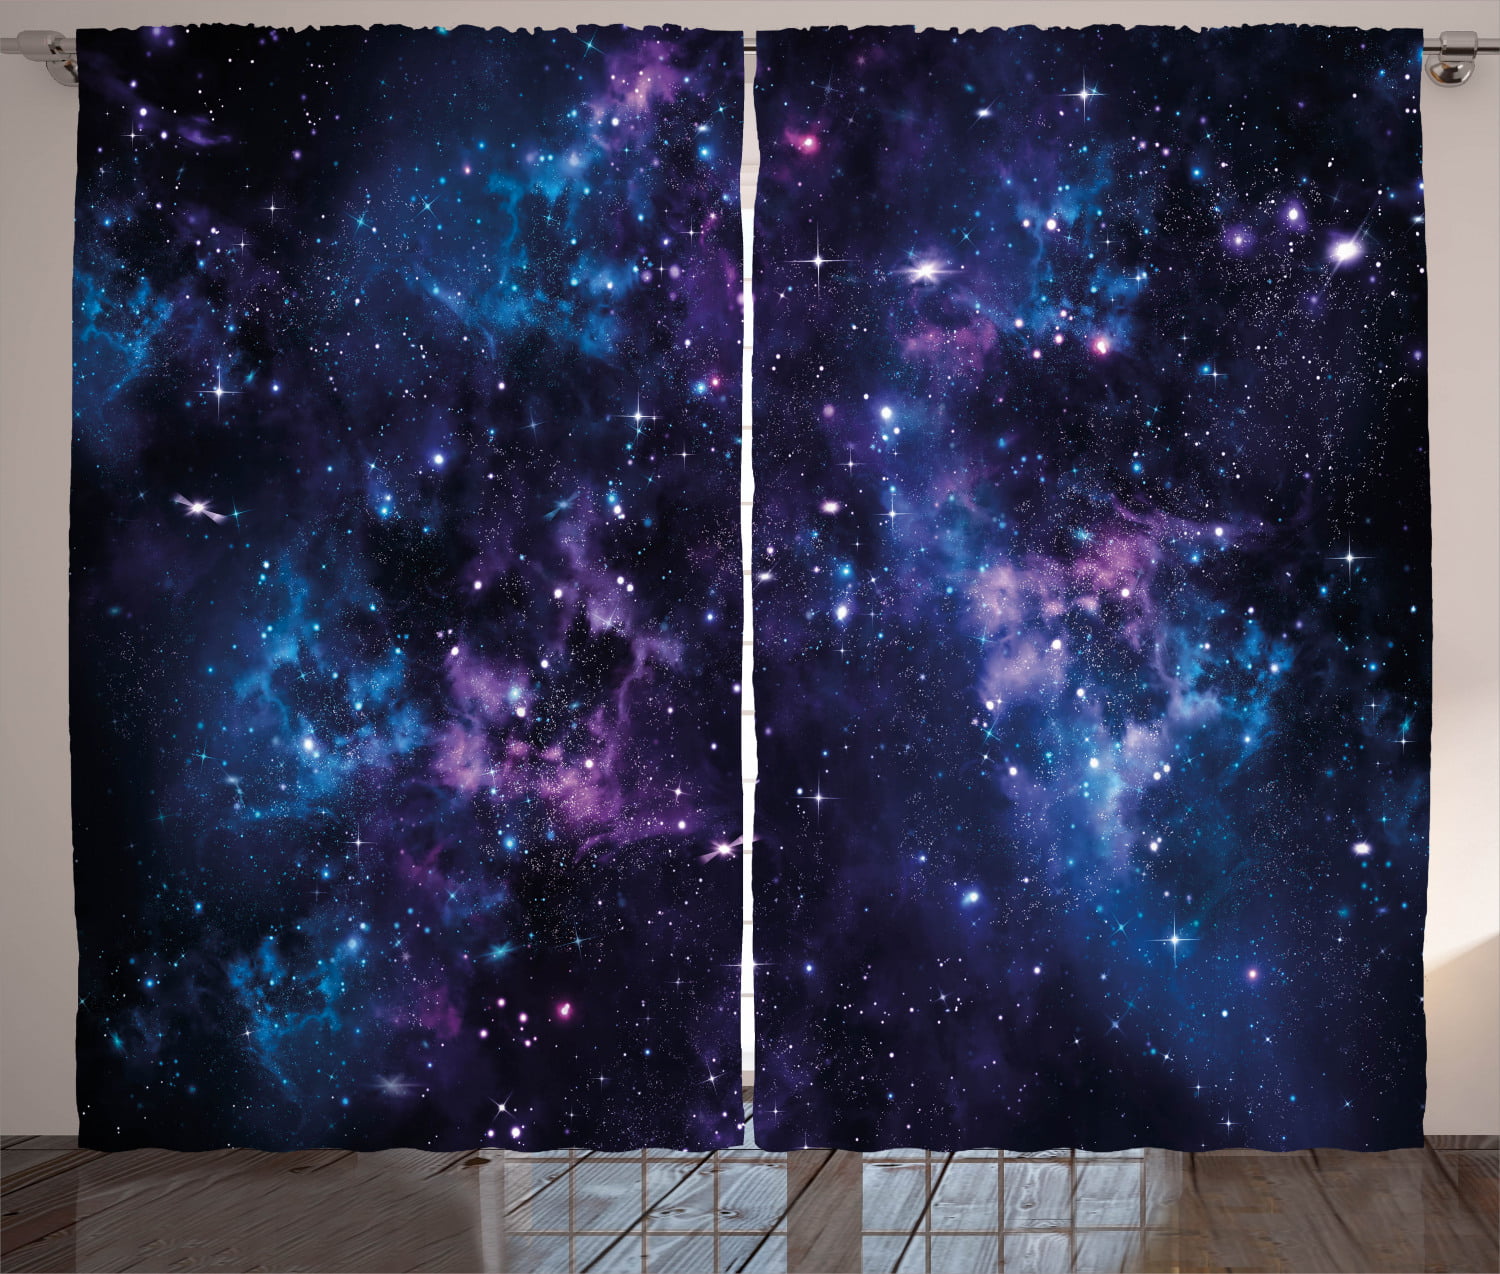 Galaxy Curtains Galaxy in Outer Space Window Drapes 2 Panel Set 108x84 Inches 